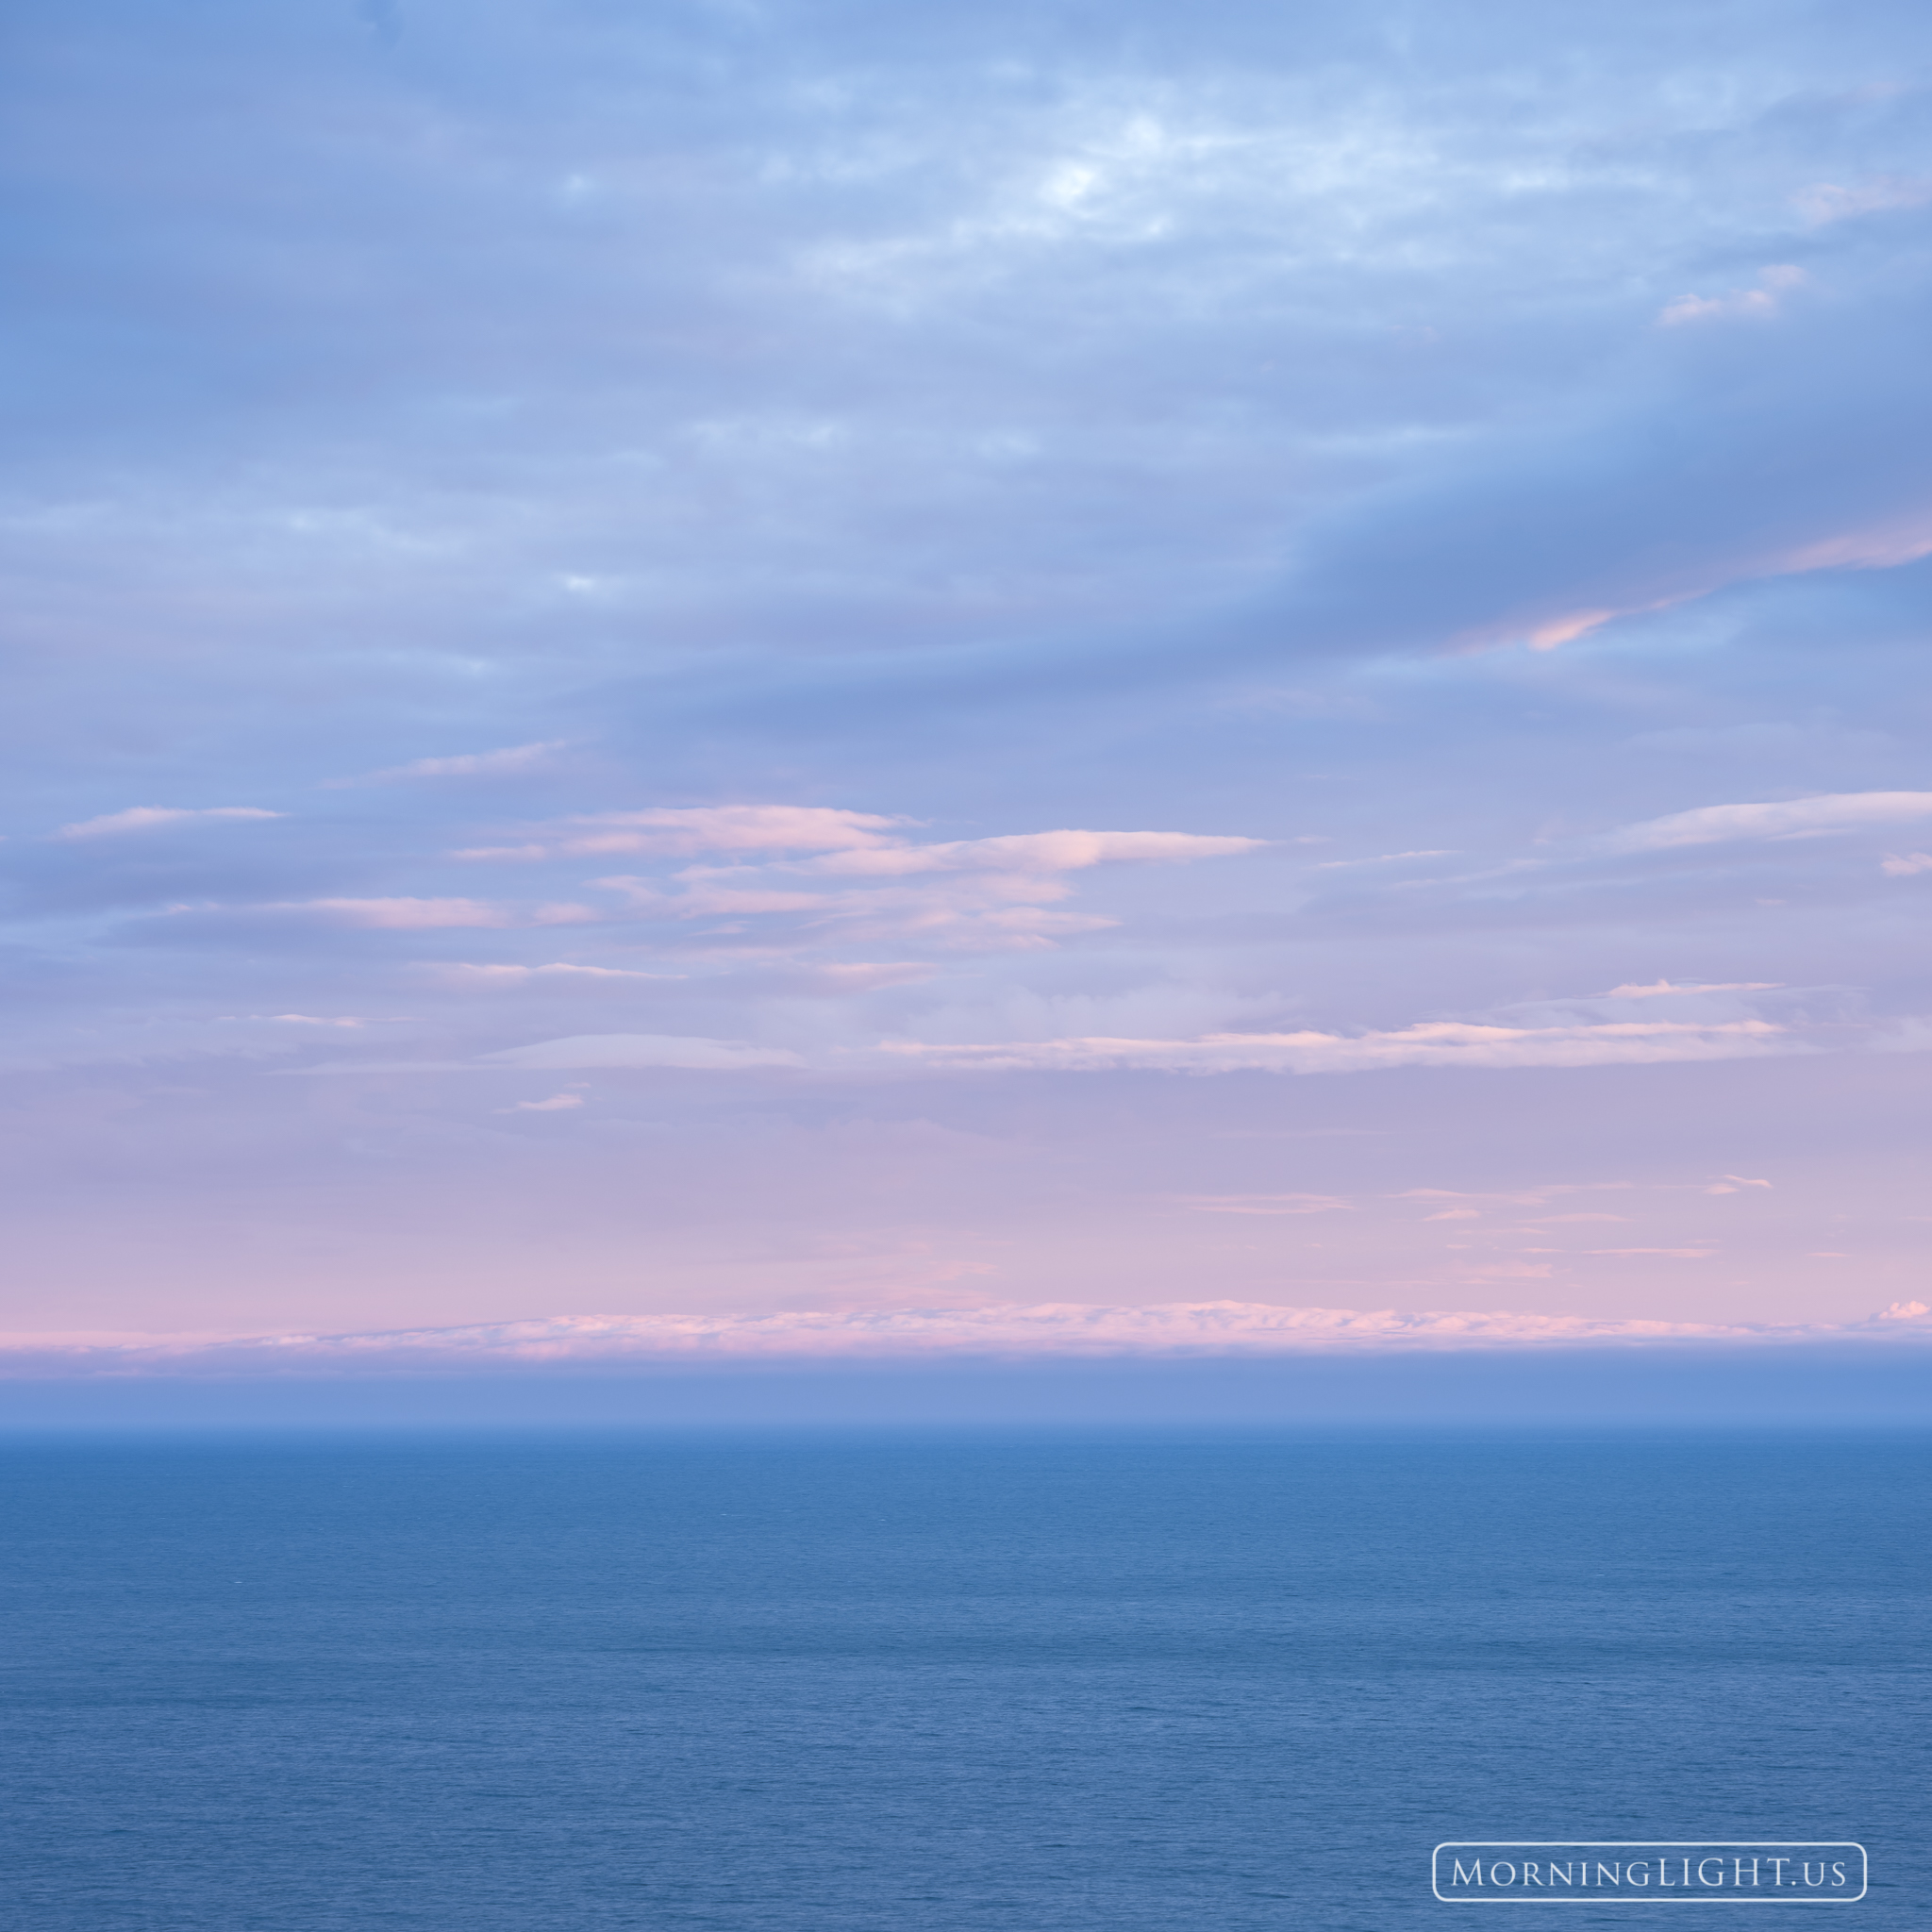 About twenty minutes after the sun set over the North Atlantic Ocean, beautiful pinks and blues appeared. On that evening the...